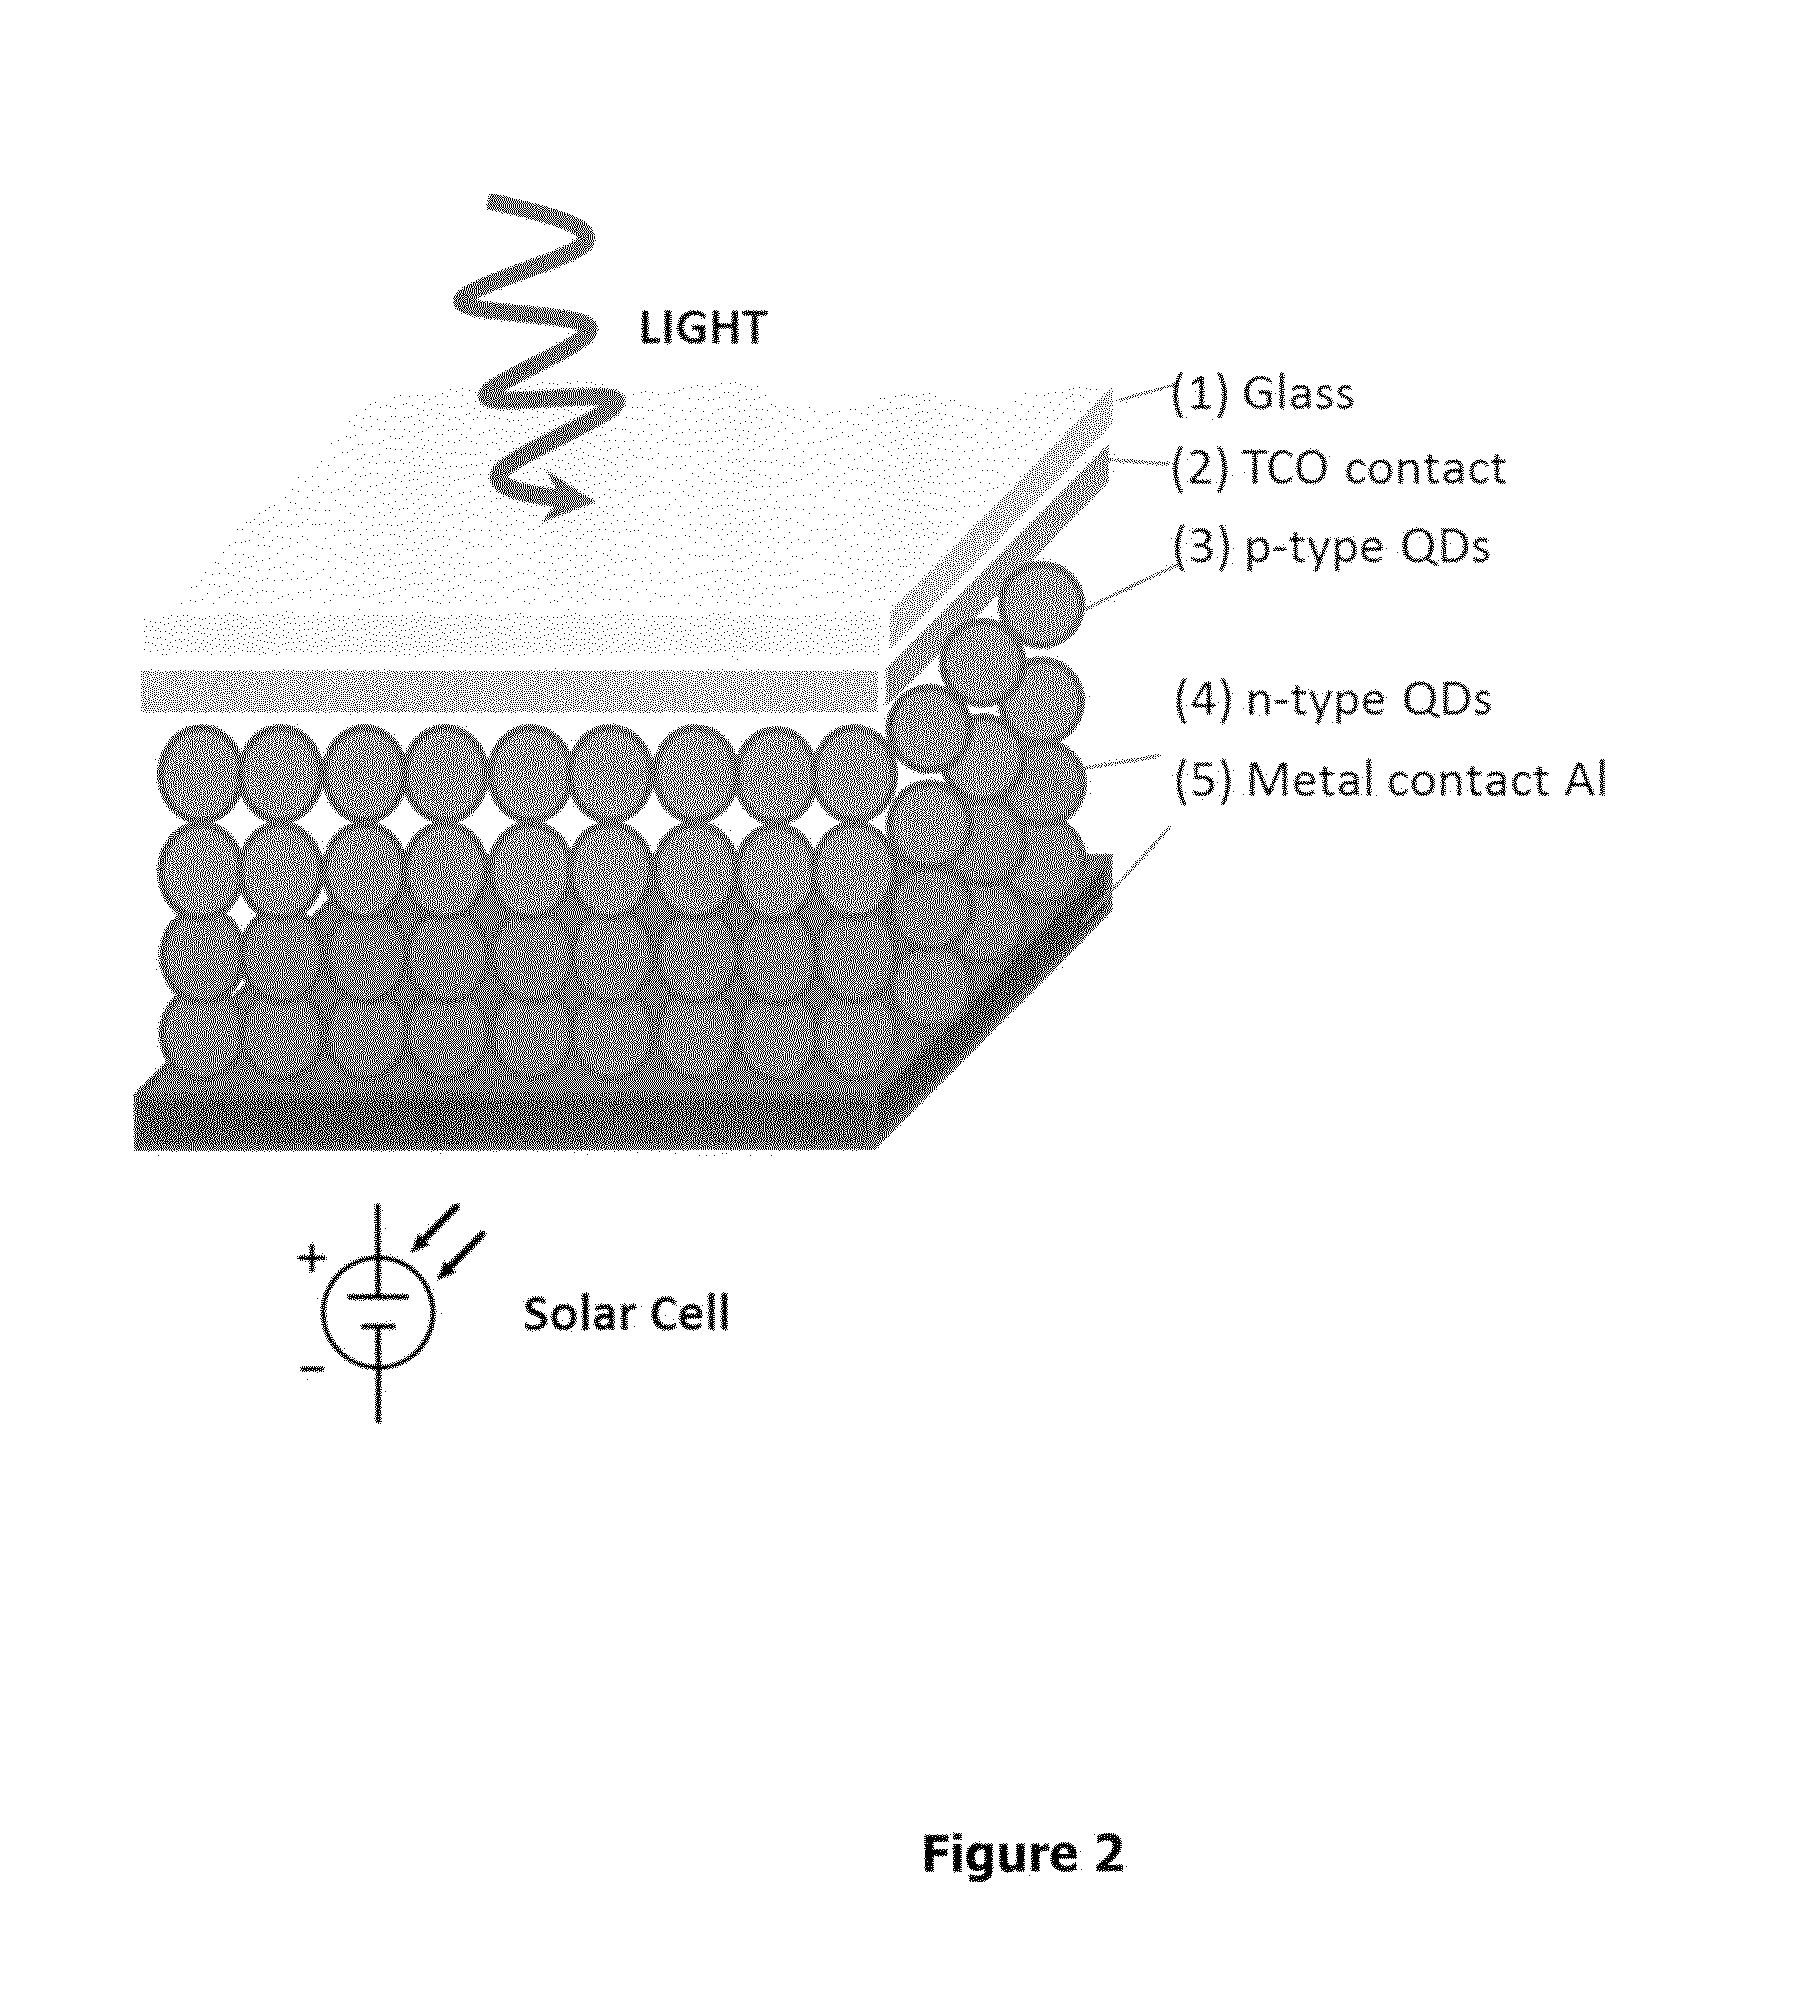 Patterned electrode contacts for optoelectronic devices